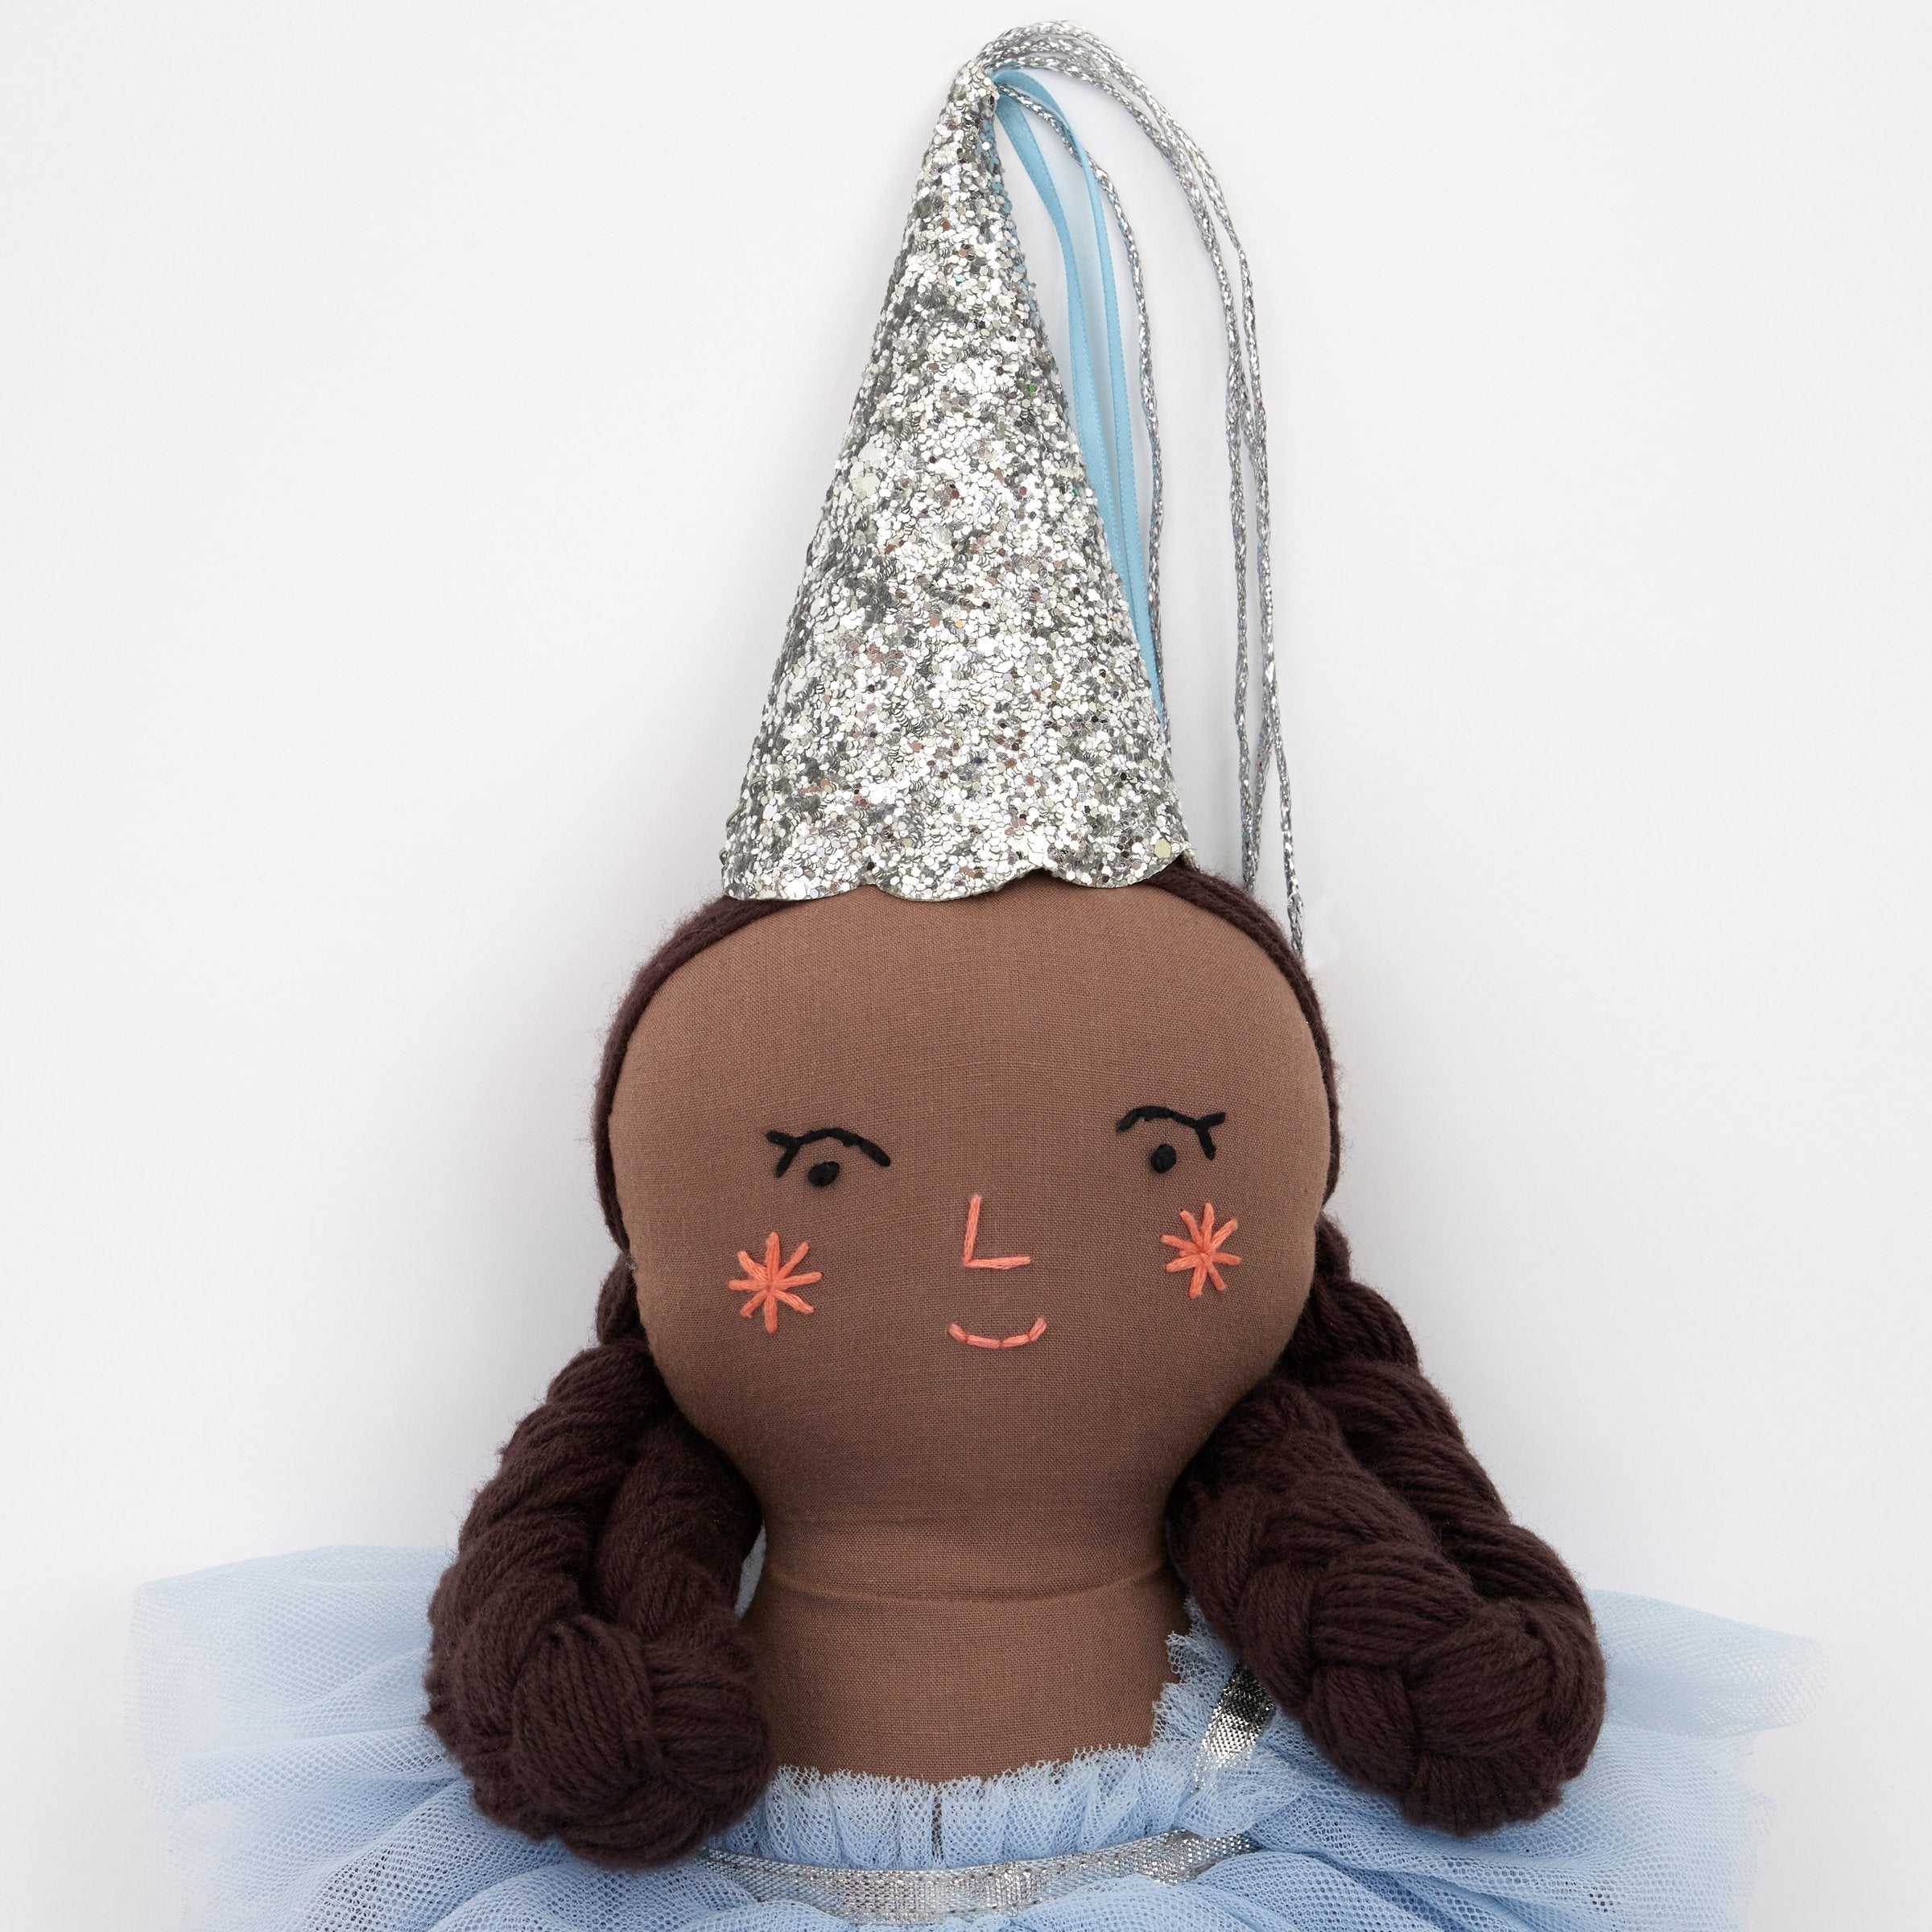 Esme is a beautiful princess toy with a gorgeous tulle dress and silver glitter hat.